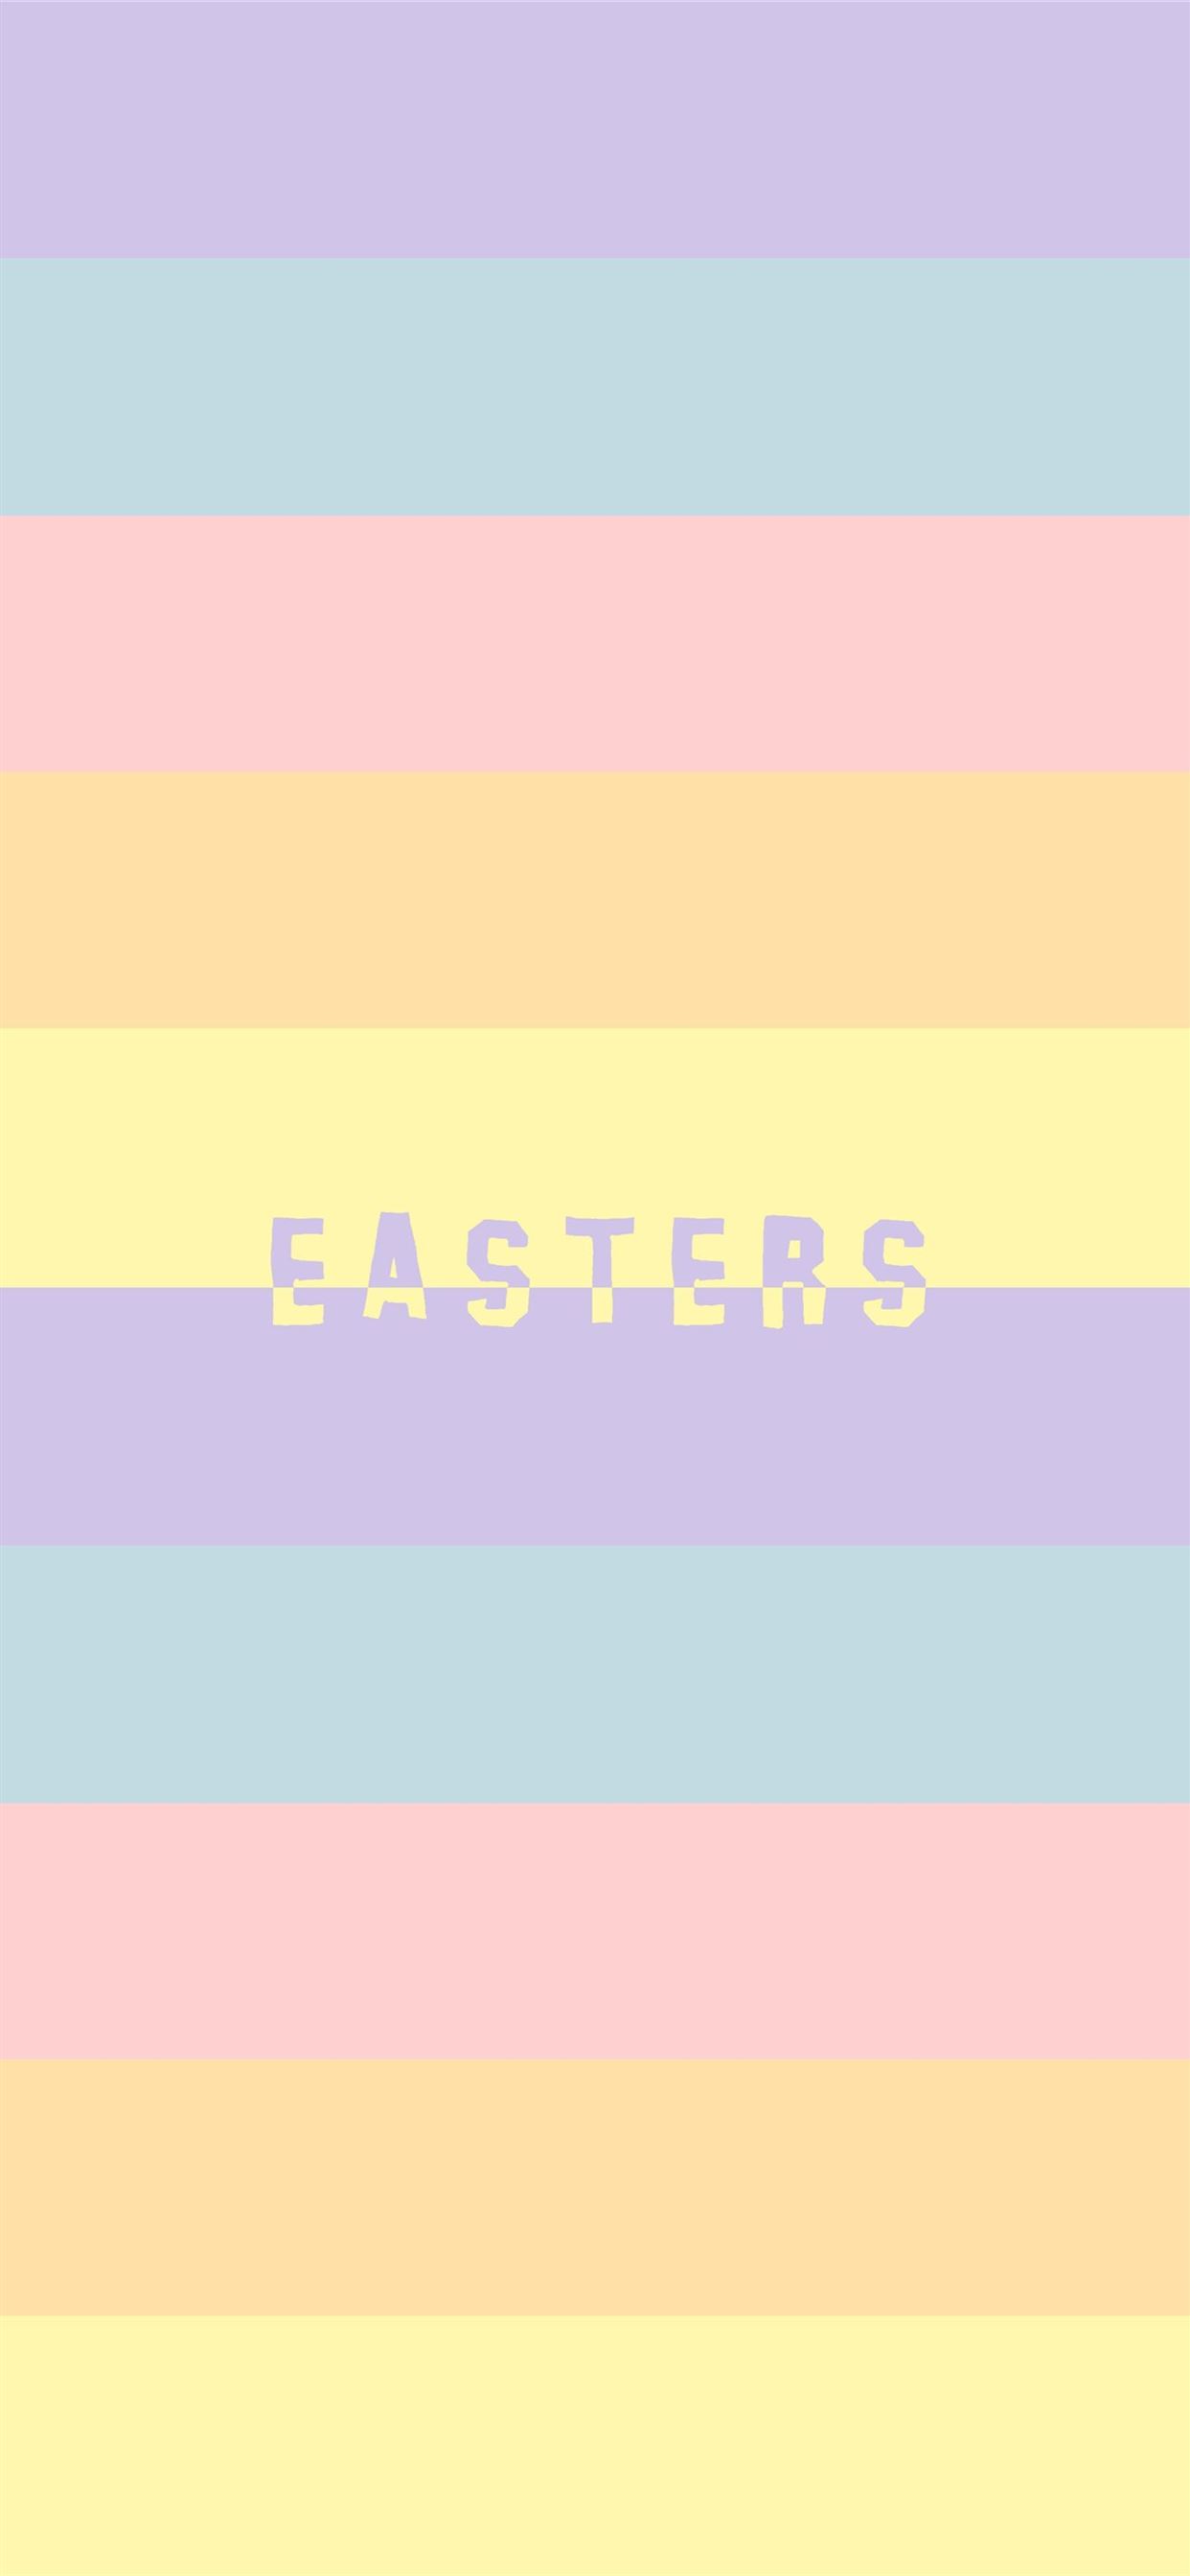 Free and customizable easter bunny templates